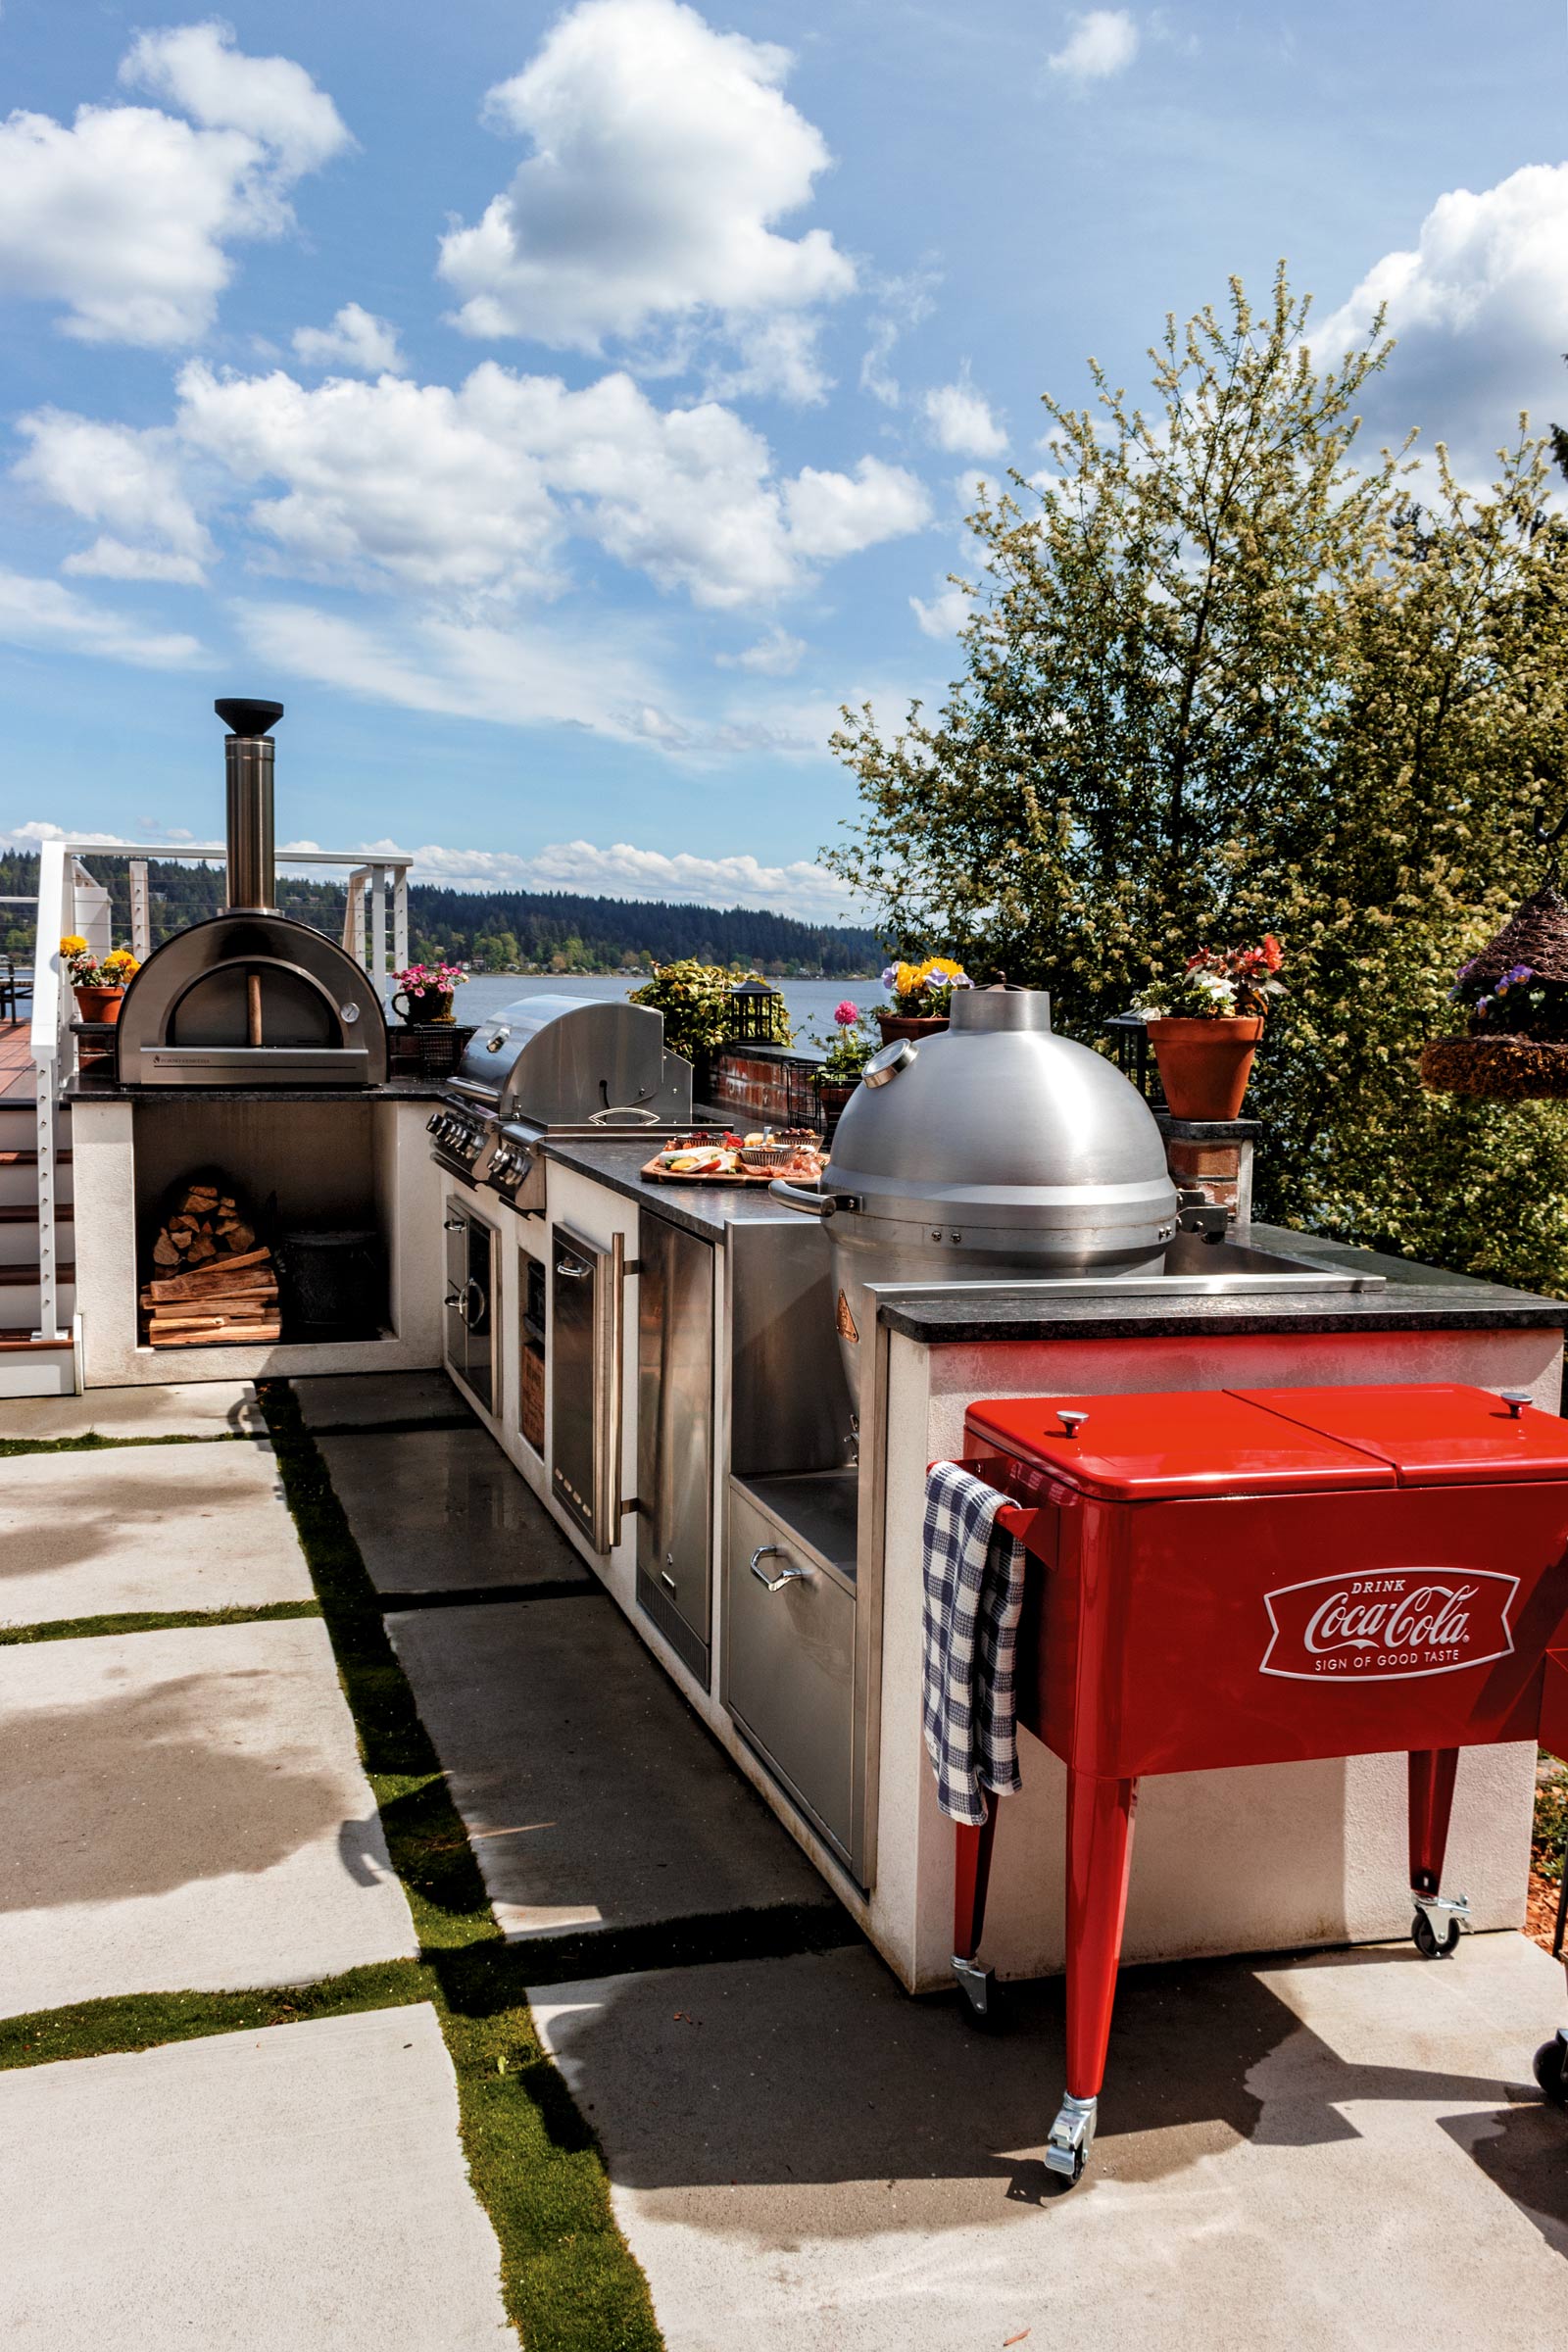 Grill Islands - Easily Create an Outdoor Kitchen in Your Backyard, Seattle, Bellevue, Tacoma, Lynnwood, Bremerton, Mt Vernon, Portland